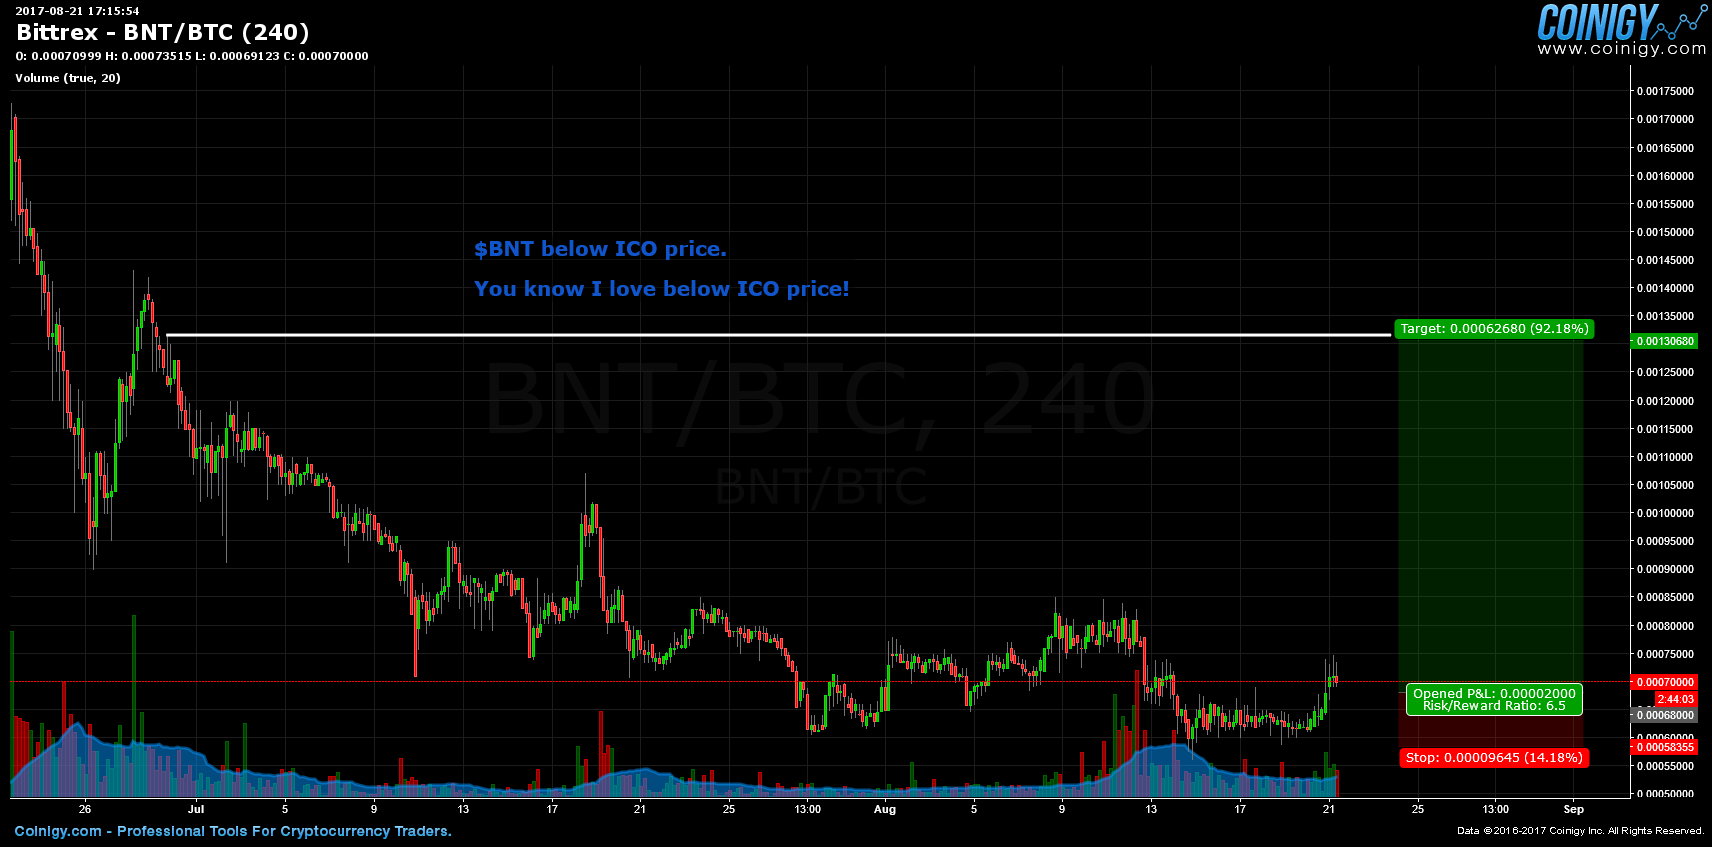 Bittrex BNT/BTC Chart - Published on Coinigy.com on August ...